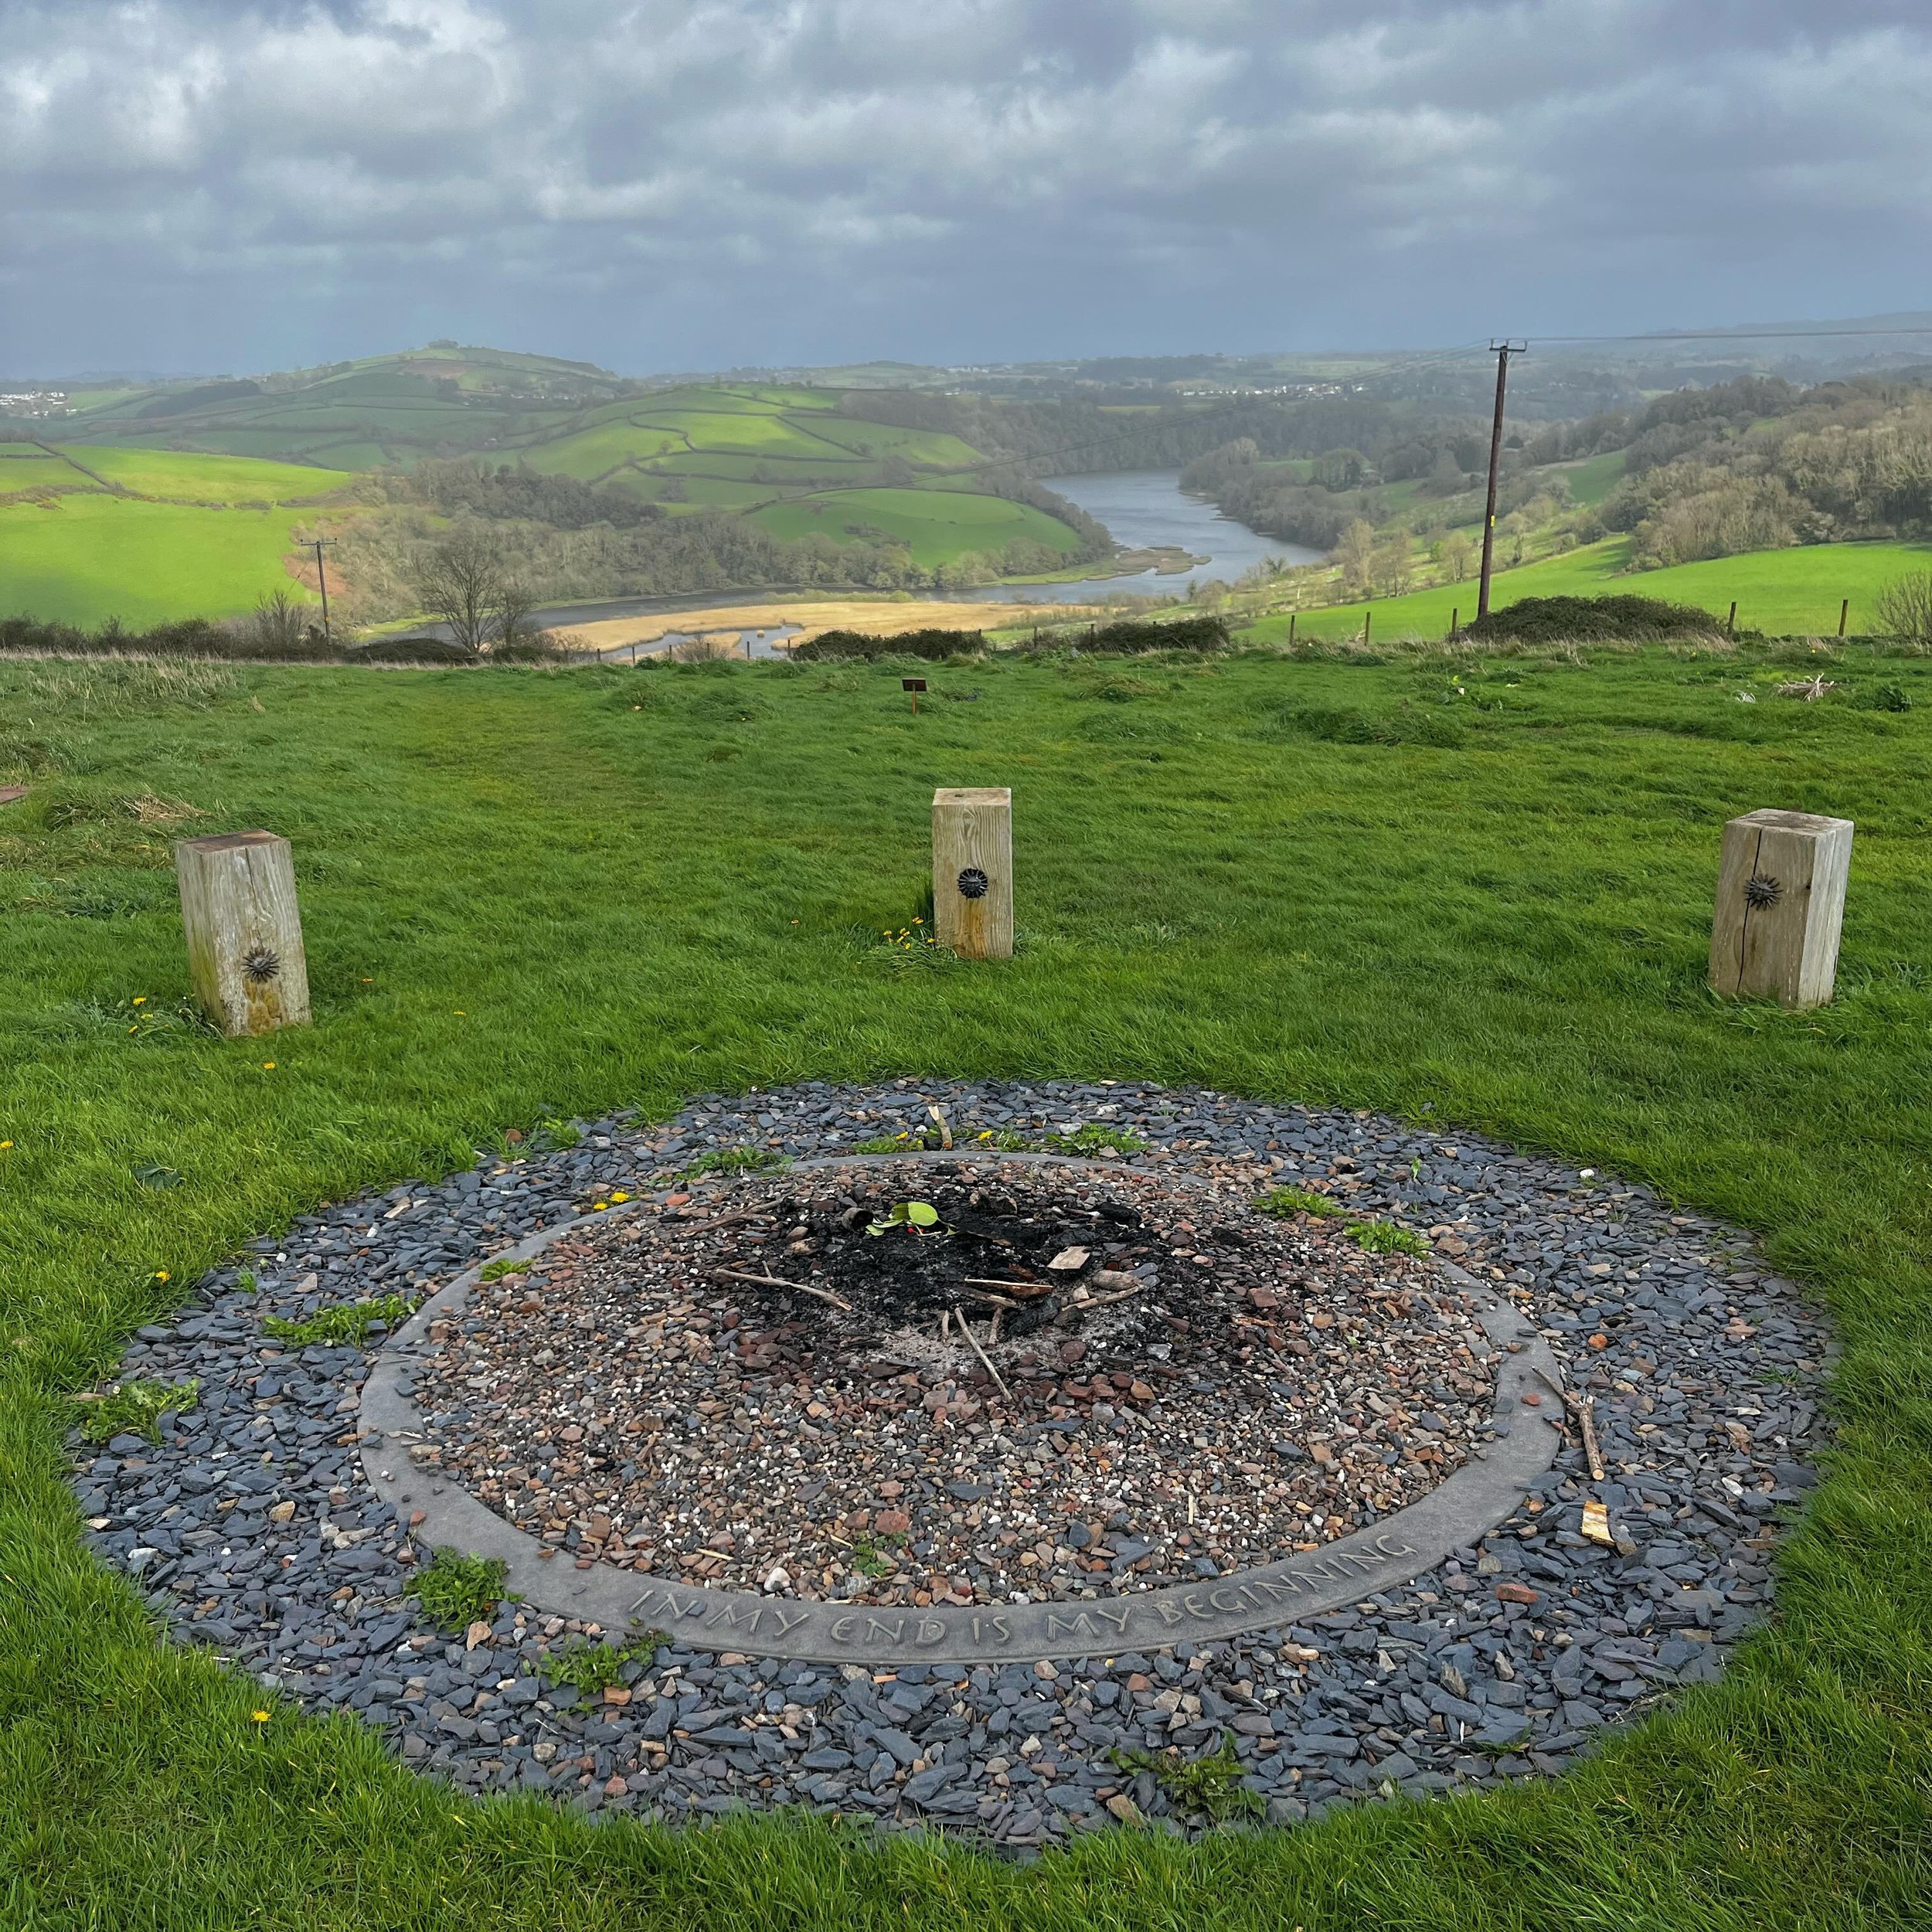 This is an incredibly sacred space. In a relational context, humans and this amazing landscape are intertwined through life and death. This is located in Devon, England. Overlooking the dear River Dart. It is the Sharpham Meadow Natural Burial Ground